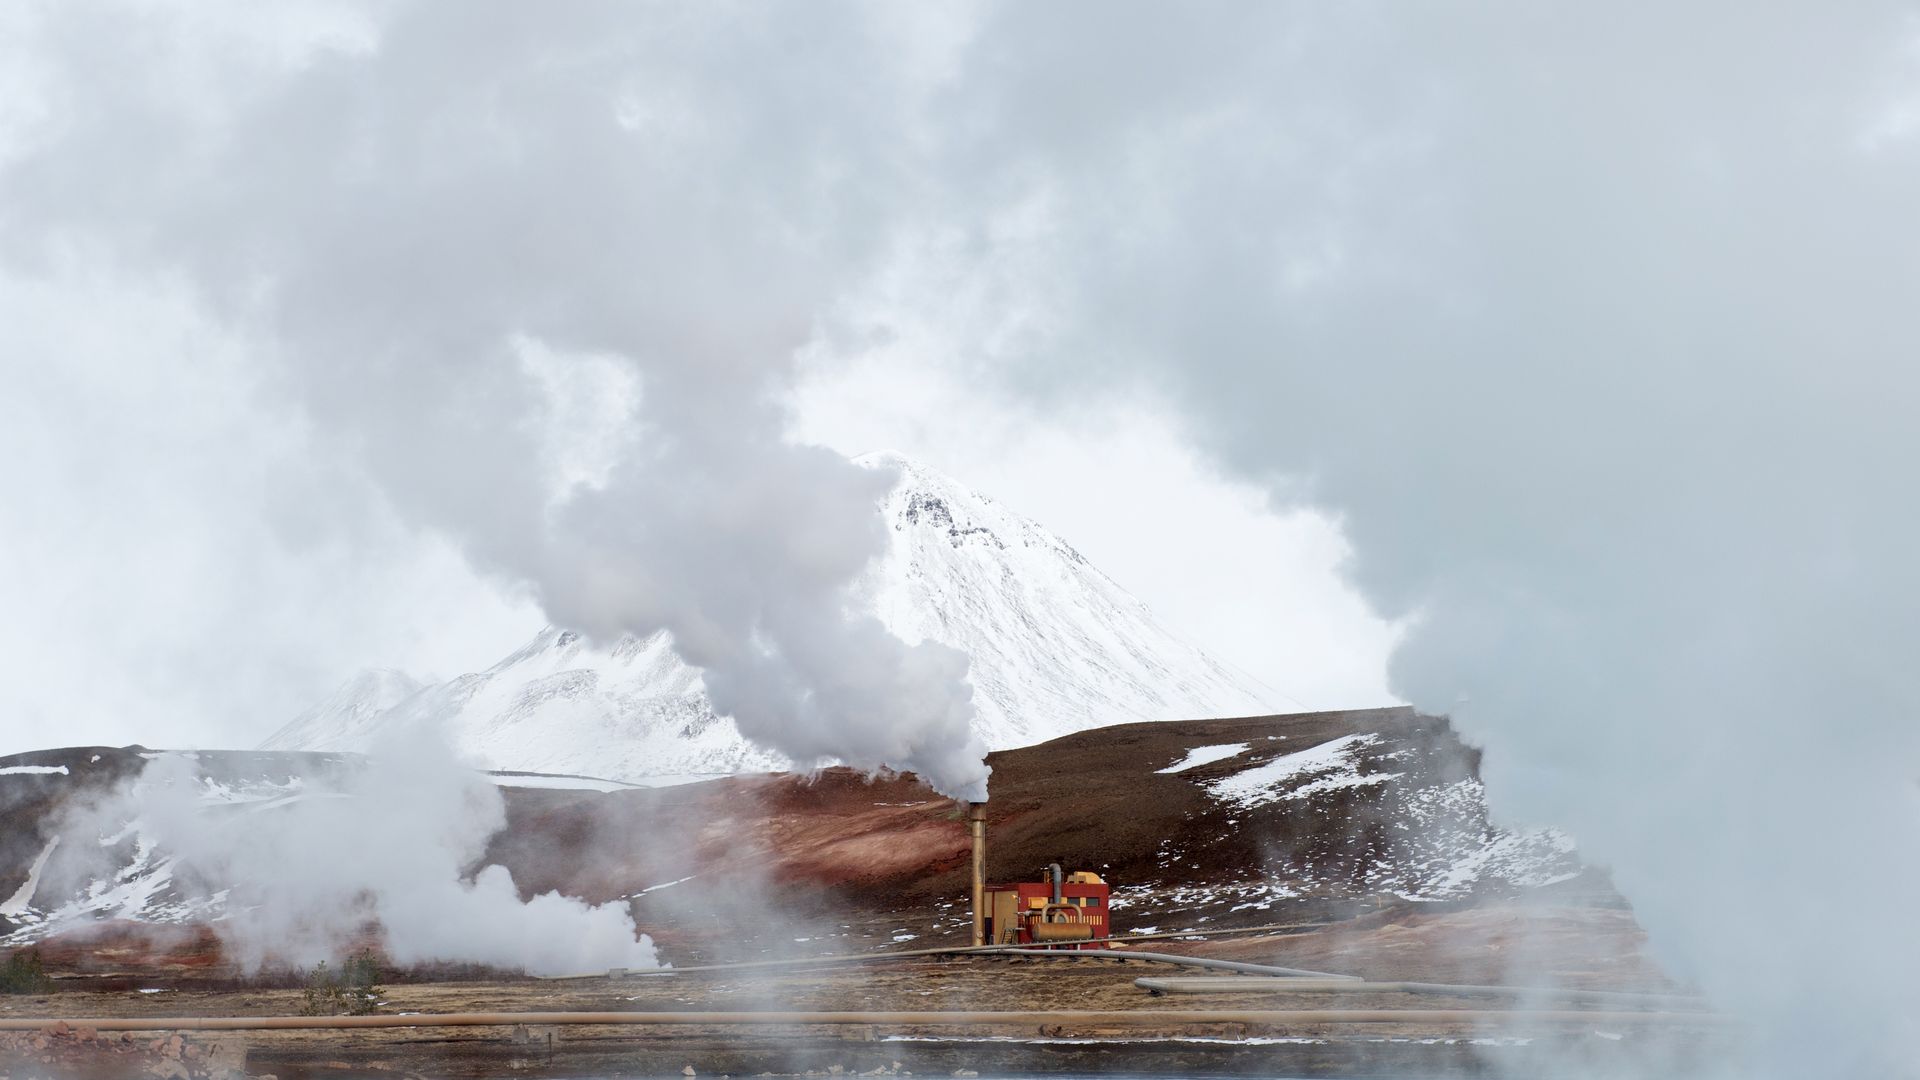 A geothermal plant spewing steam on April 12, 2017, outside Myvatn, Iceland.